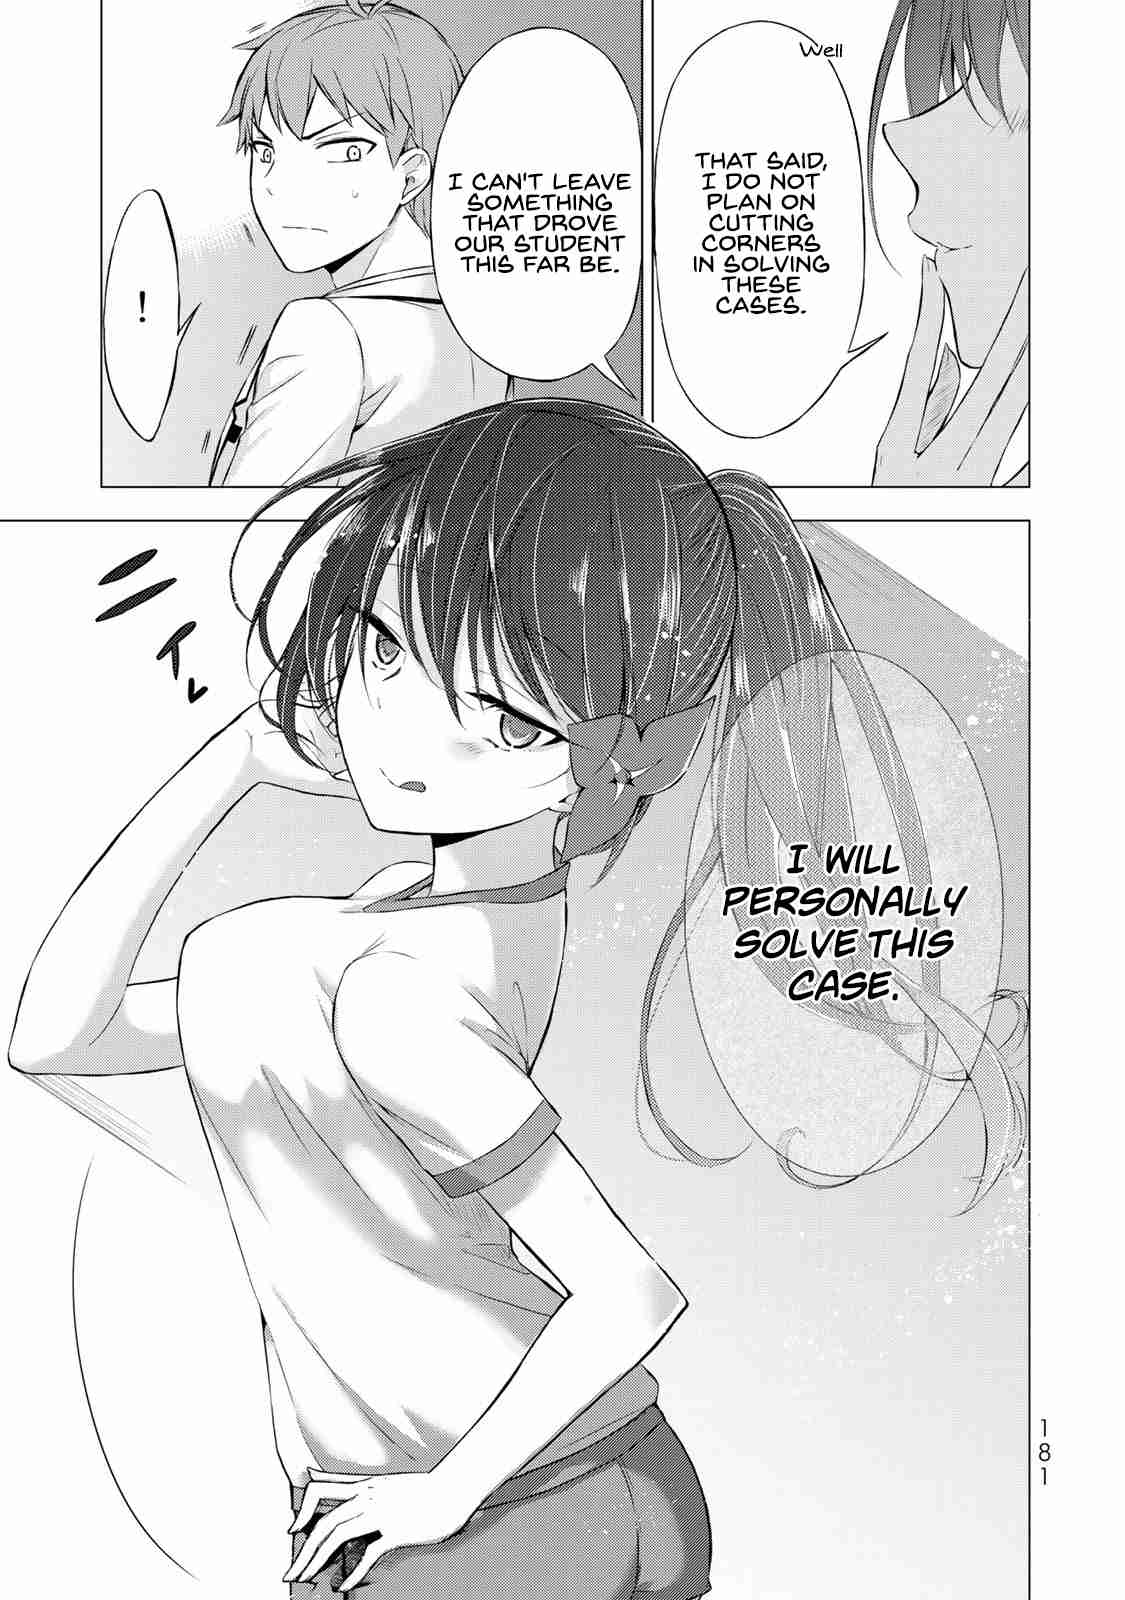 The Student Council President Solves Everything on the Bed Vol. 1 Ch. 4 Accident at the Marathon Part 1